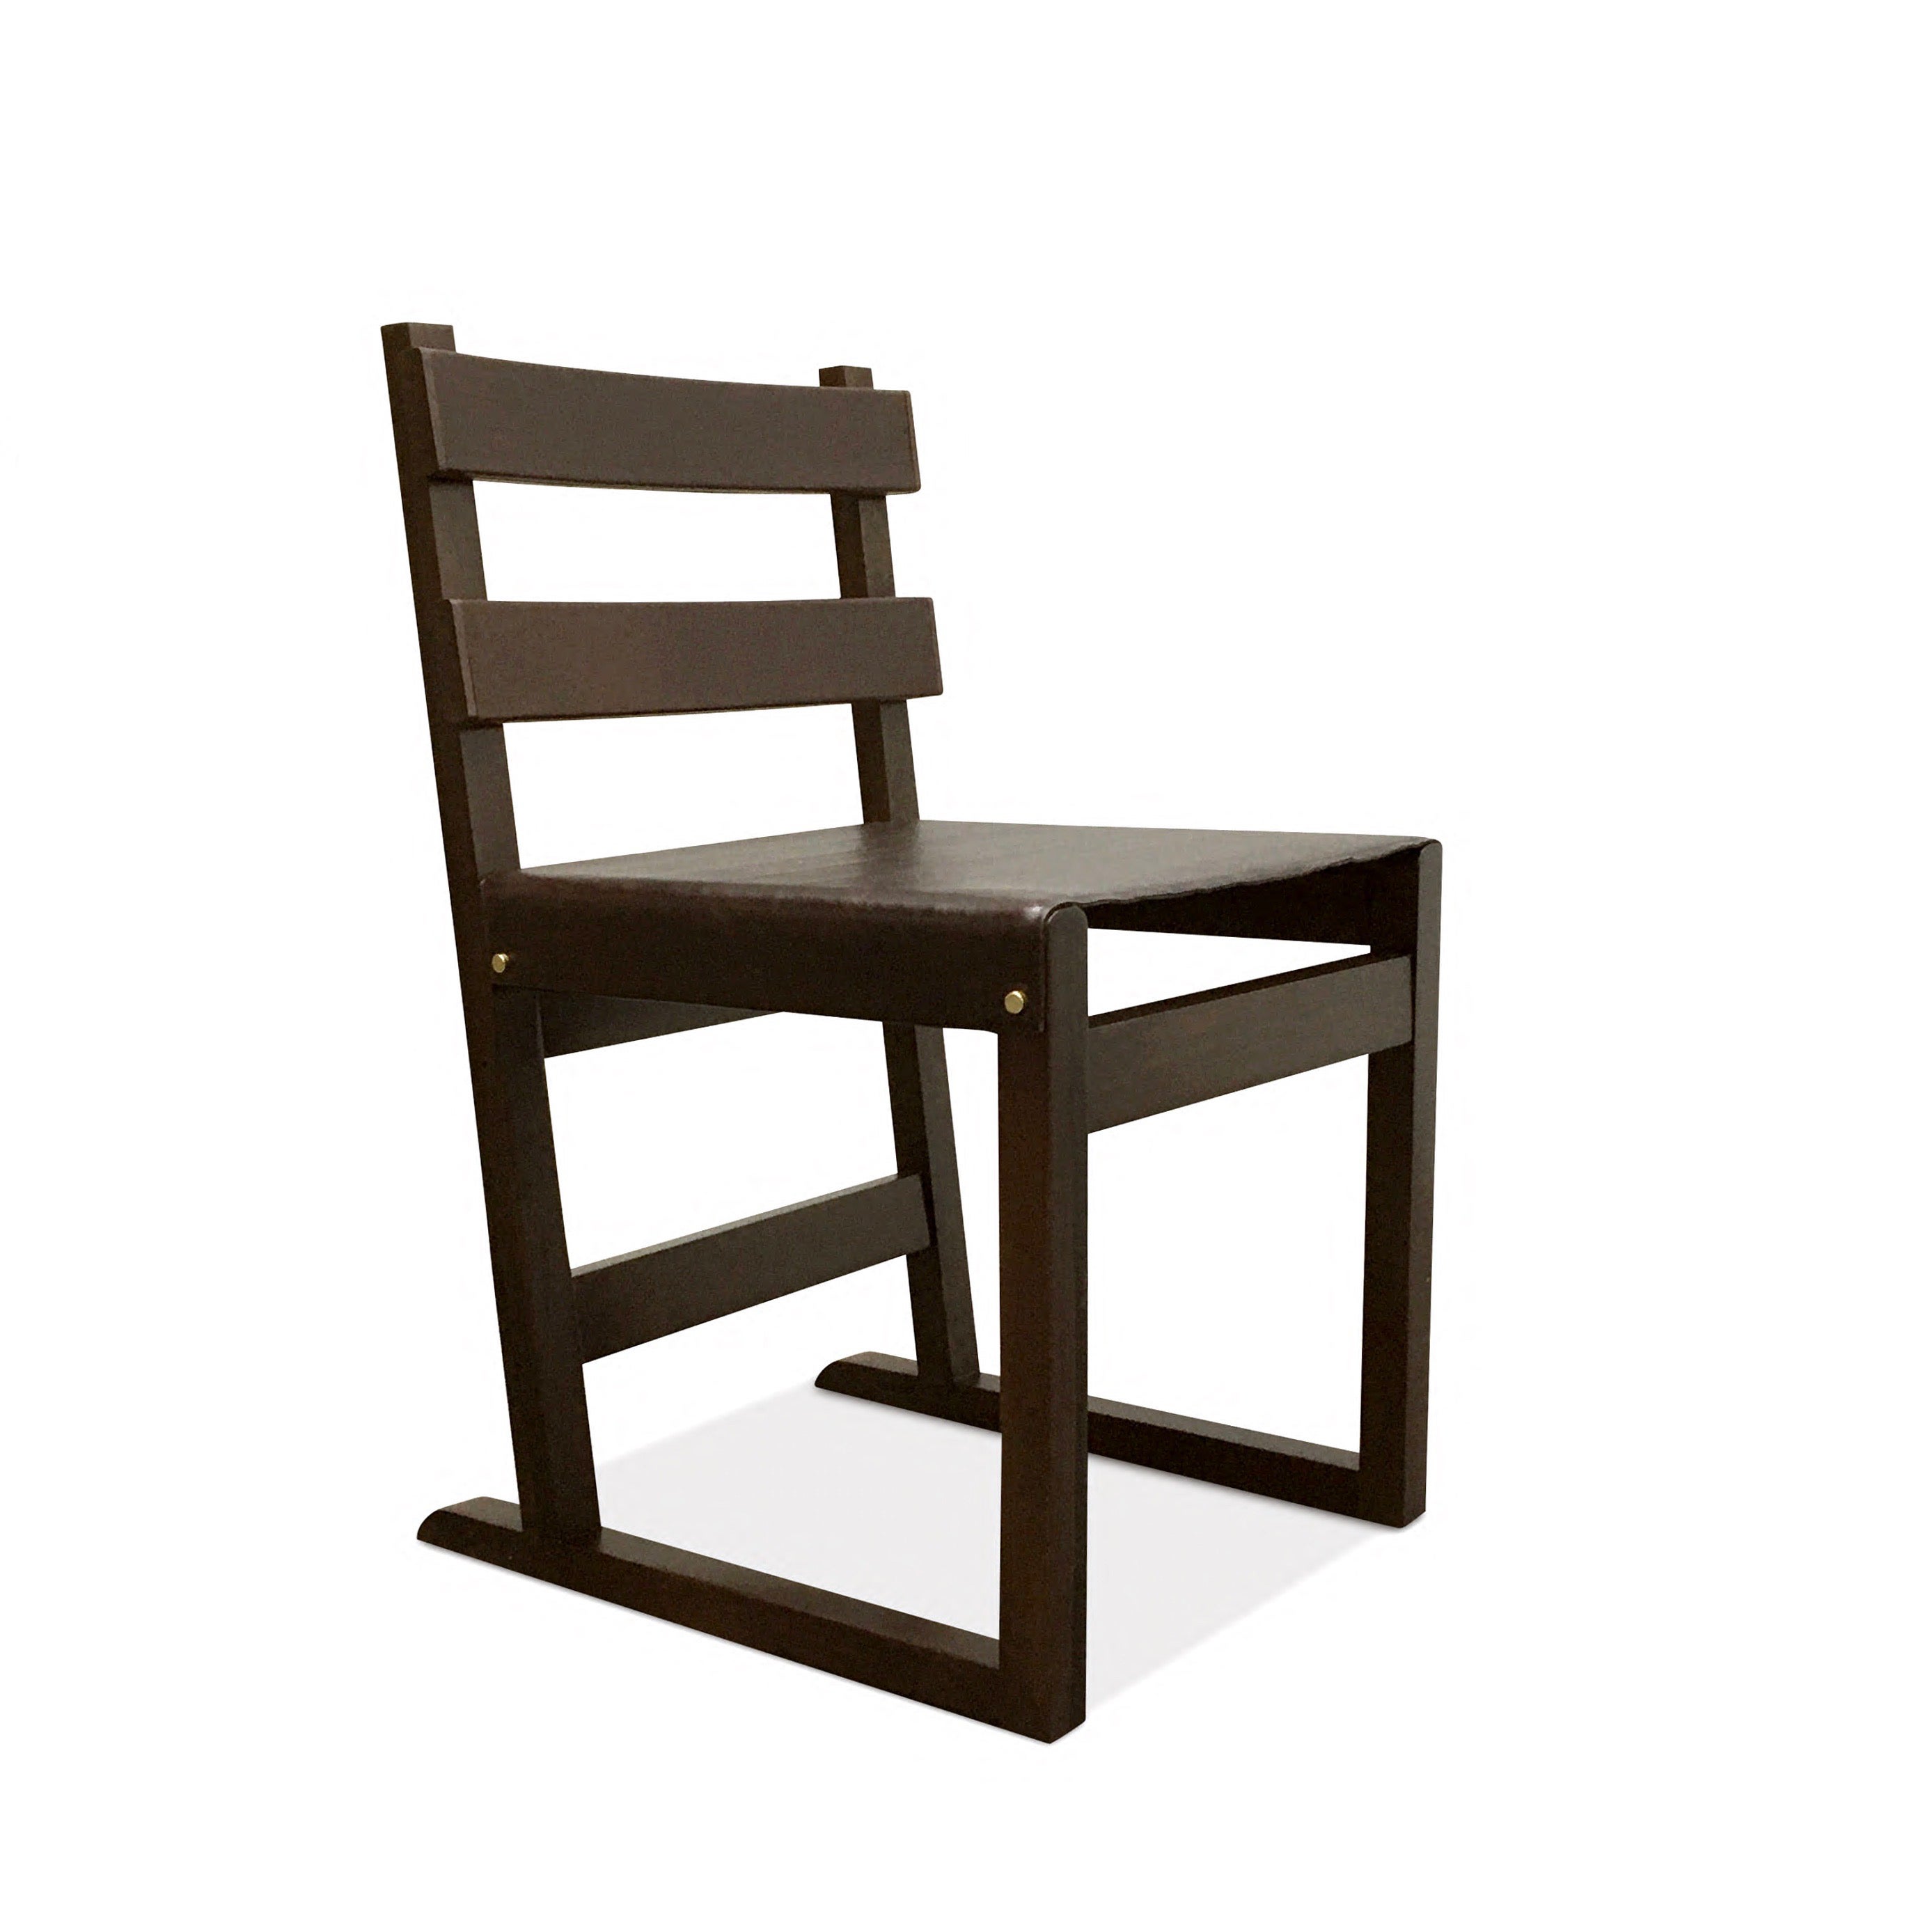 Slung and Wrapped Leather Slatted-Back Chair from Costantini, Piero 